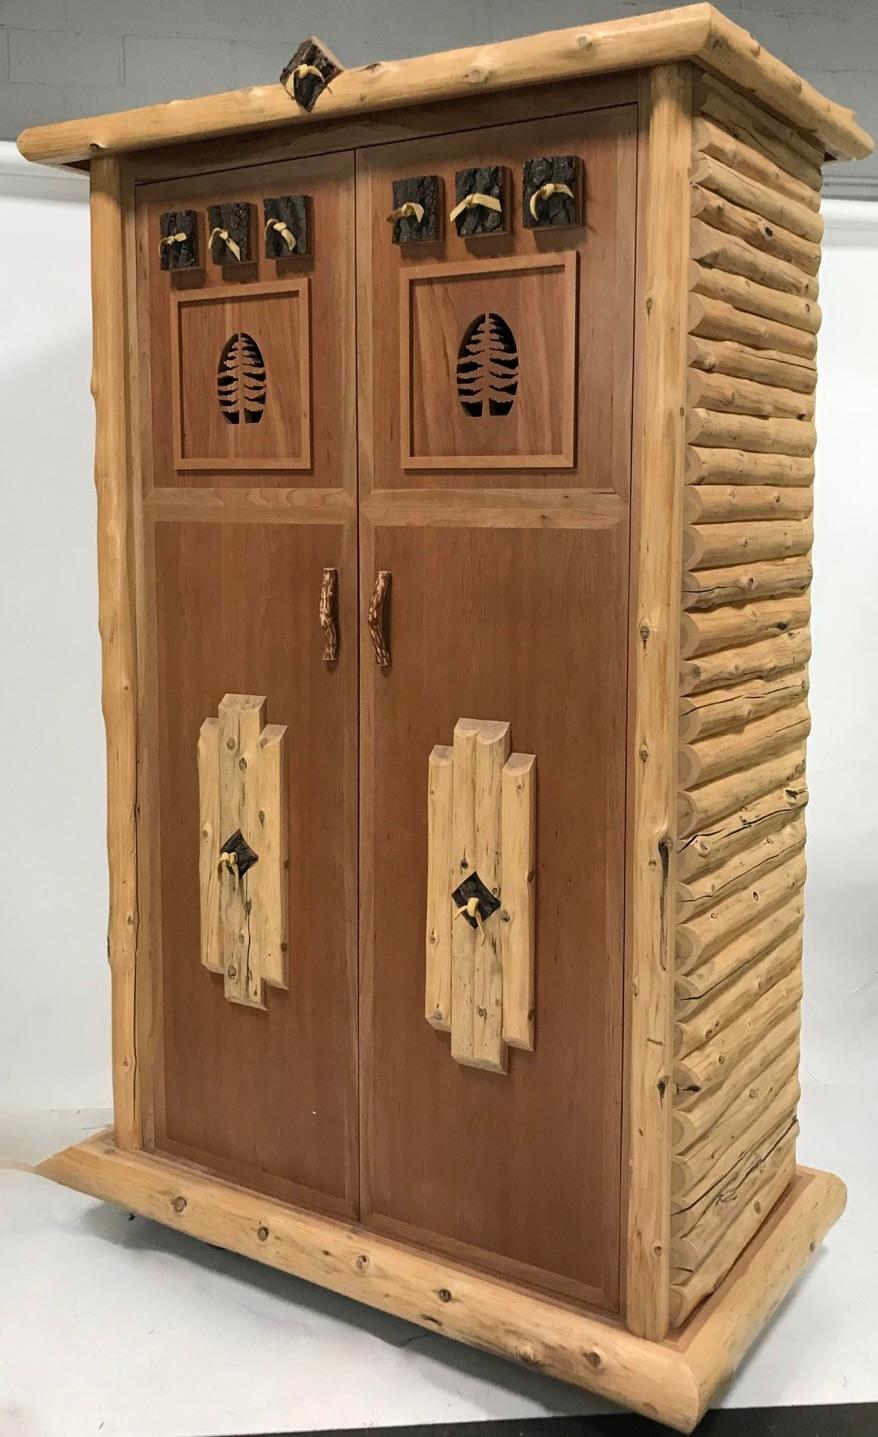 This is. call to all Aspen, Sun Valley, Jackson Hole, Vail and Santa Fe dwellers who bask in the ambiance of a rustic interior. This gorgeously hand-crafted rustic piece has ample built in drawers. The two upper shelves are removable should you wish